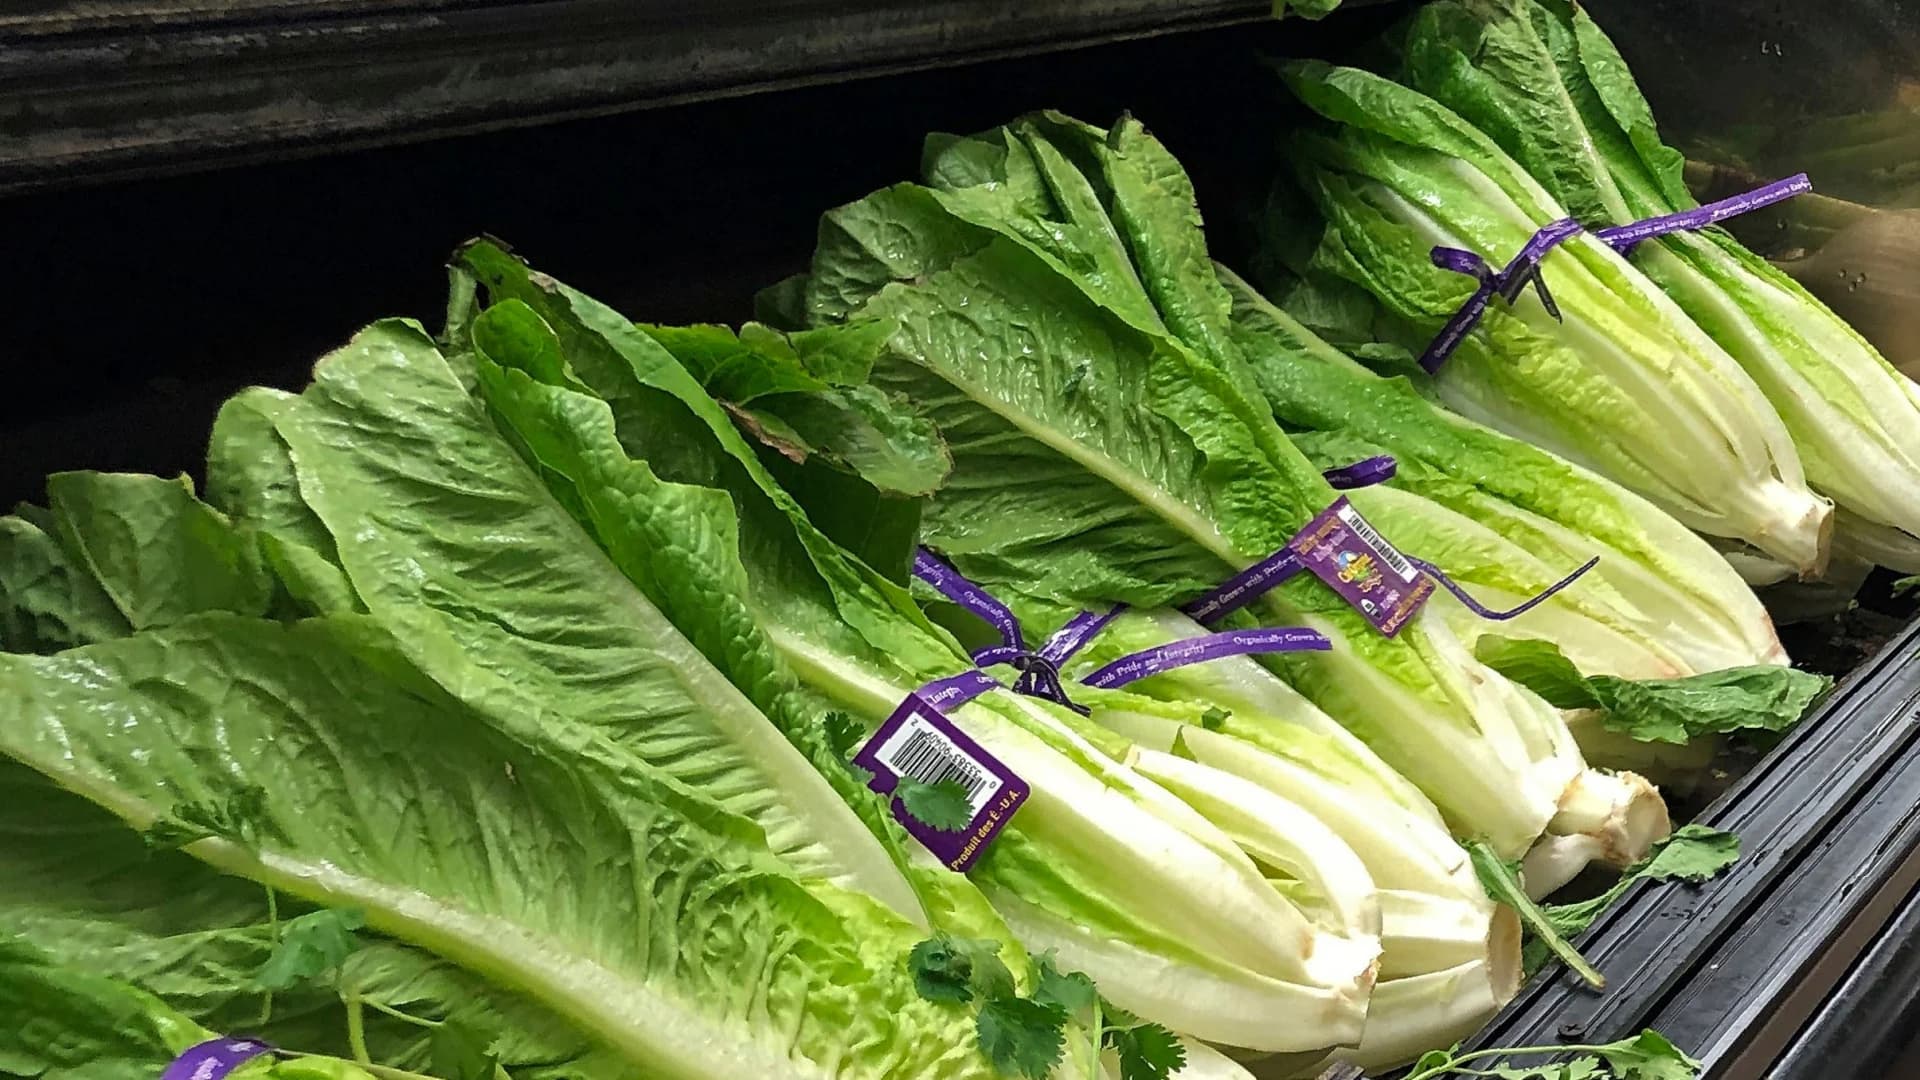 US officials: Don’t eat romaine grown in town in California